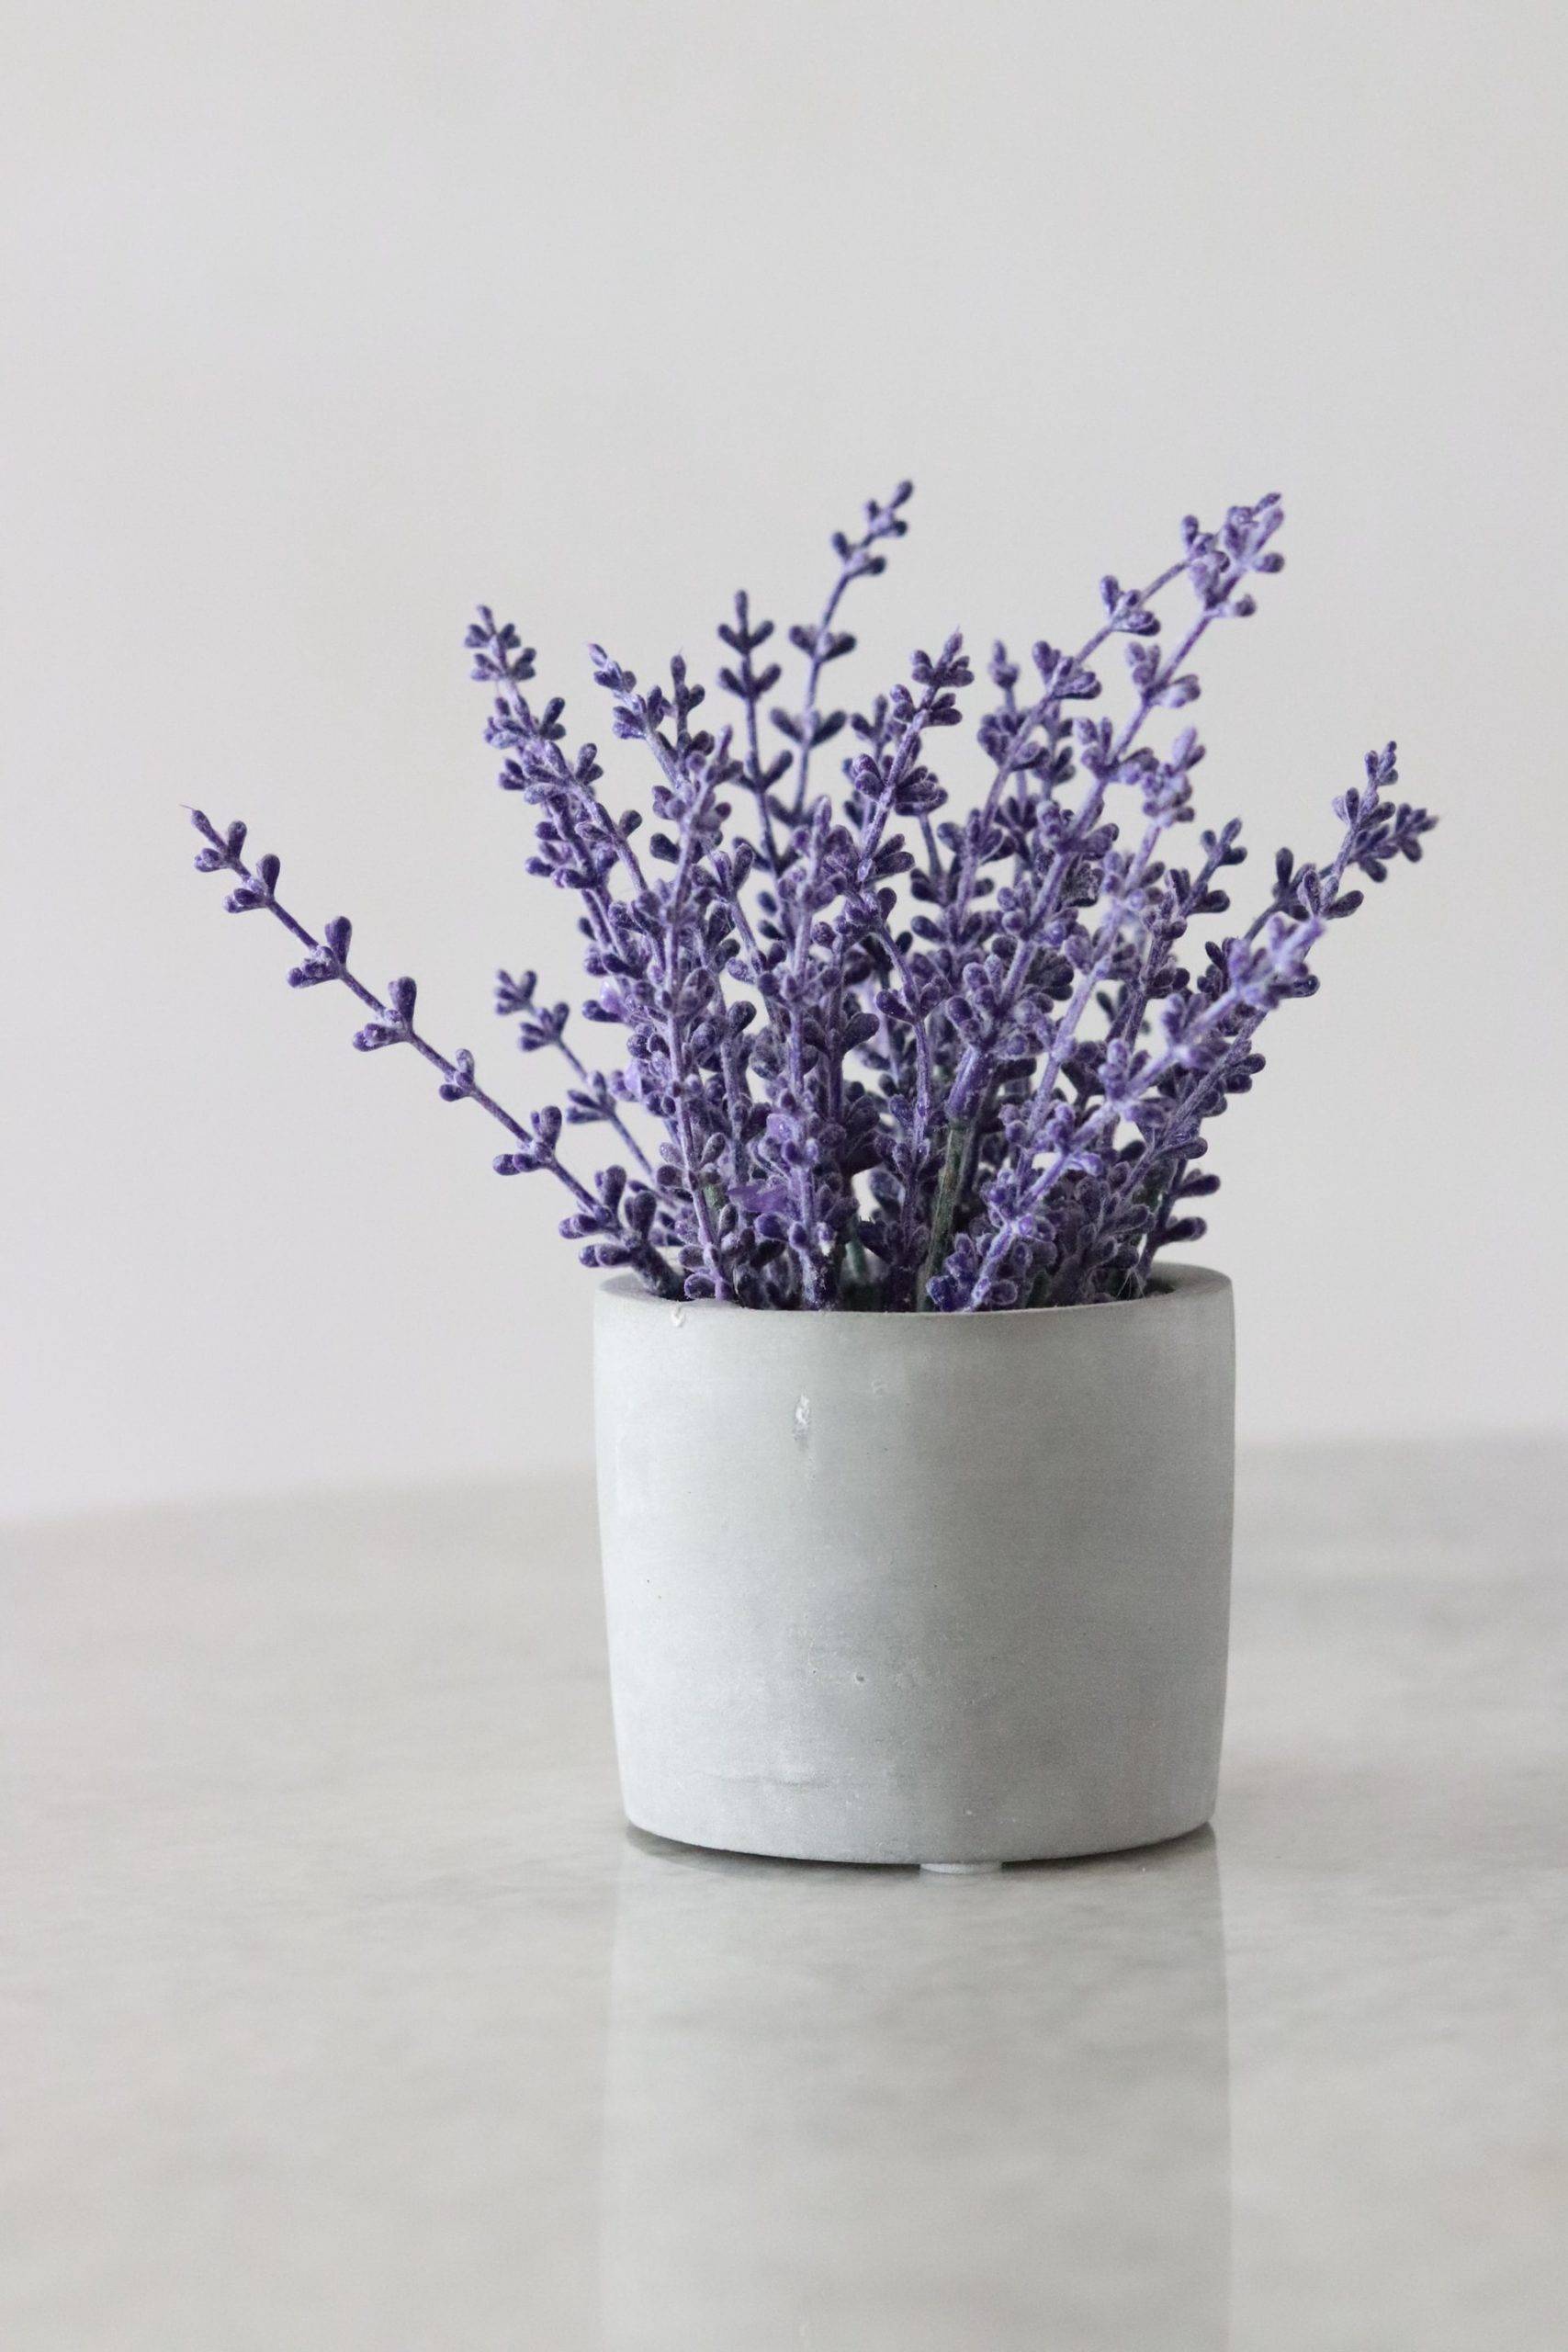 Lavender scents promotes relaxation (from Unsplash)